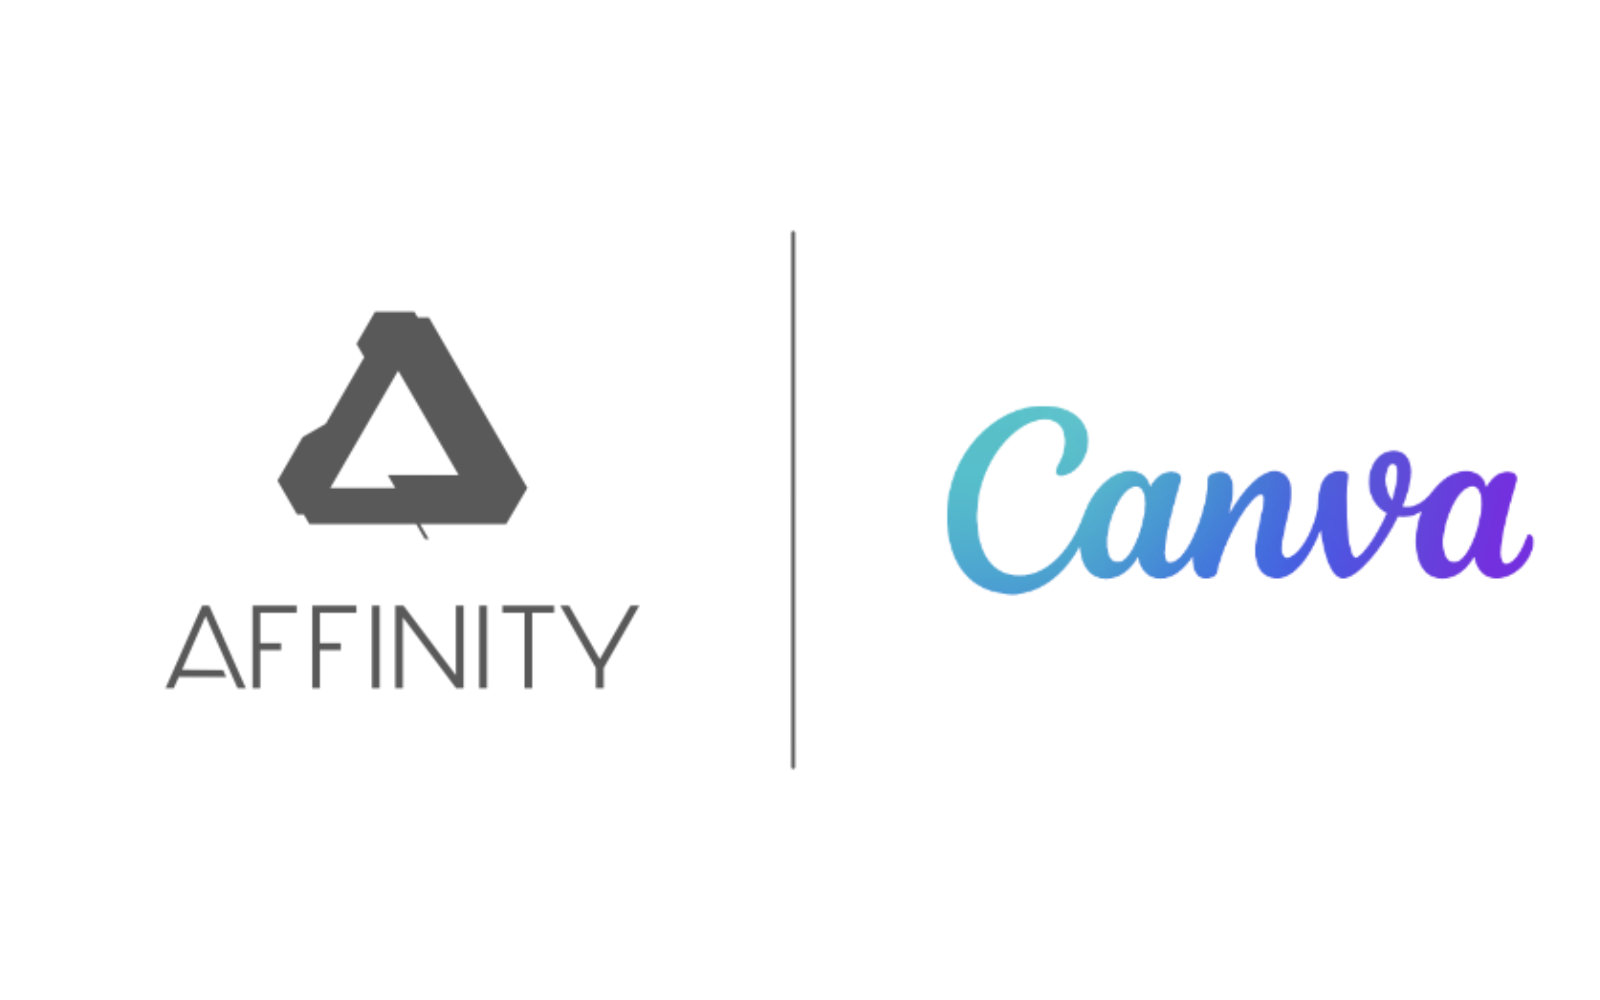 Affinity and canva